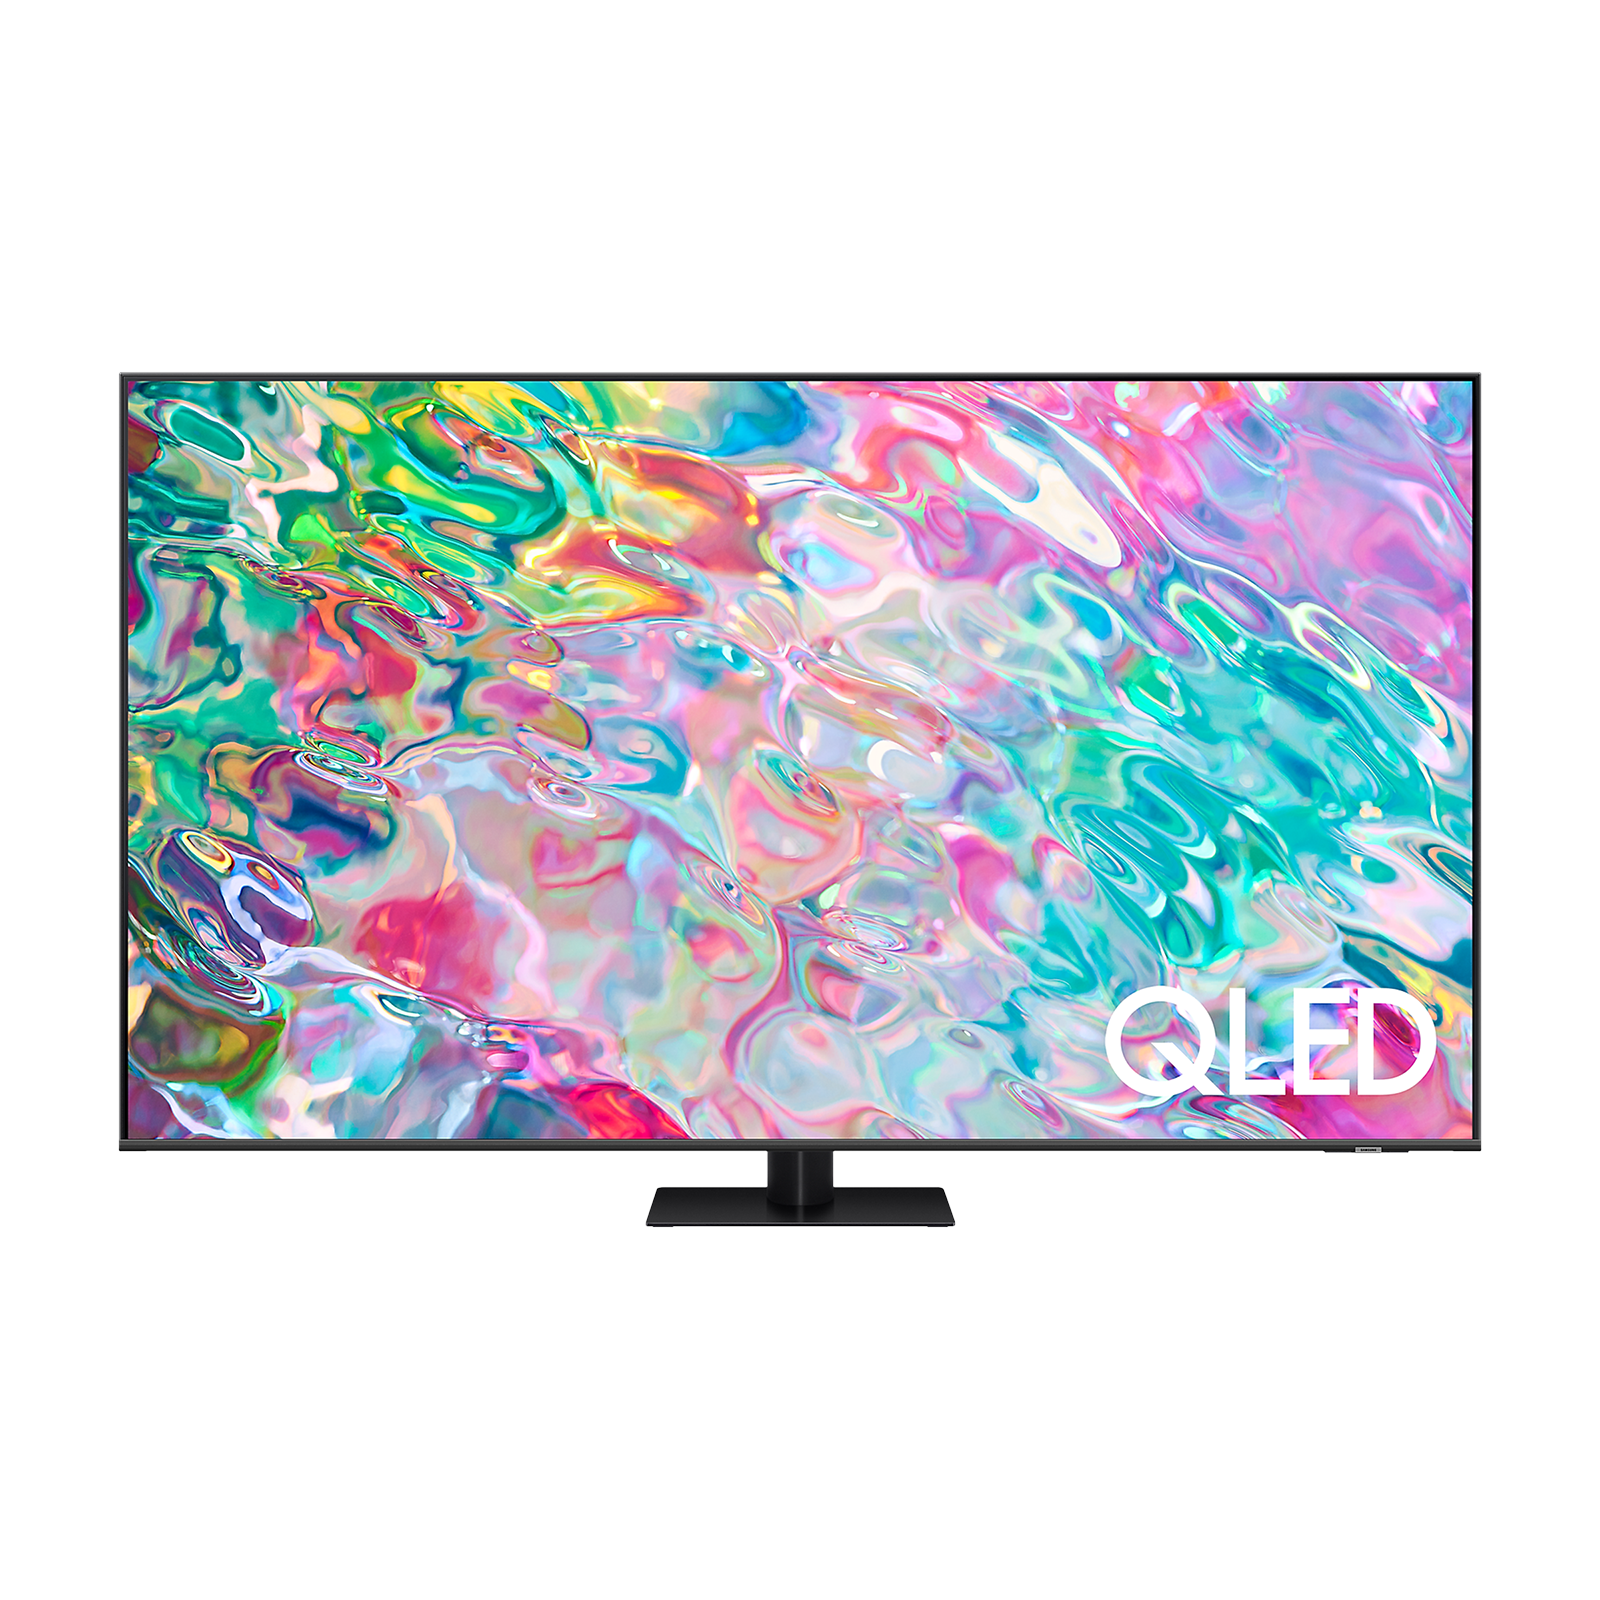 SAMSUNG Series 7 138 cm (55 inch) QLED 4K Ultra HD Tizen TV with Alexa Compatibility